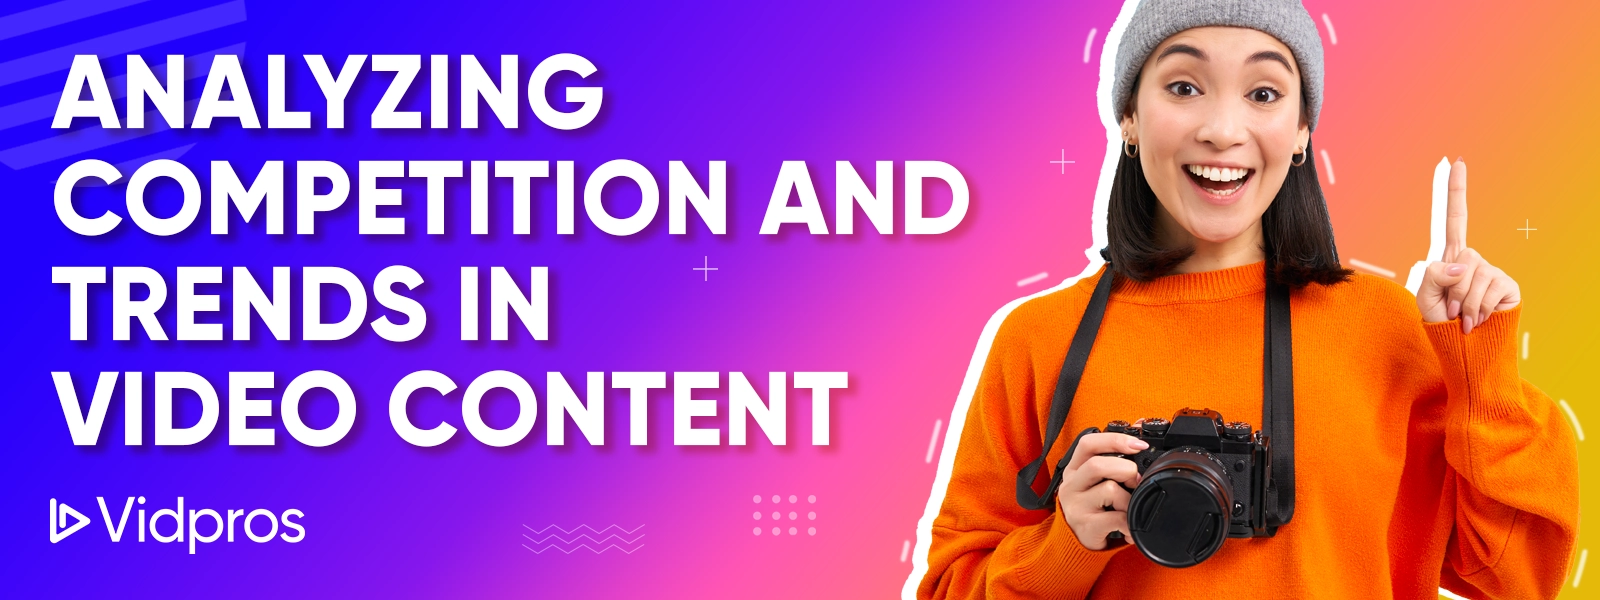 Analyzing Competition and trends video content